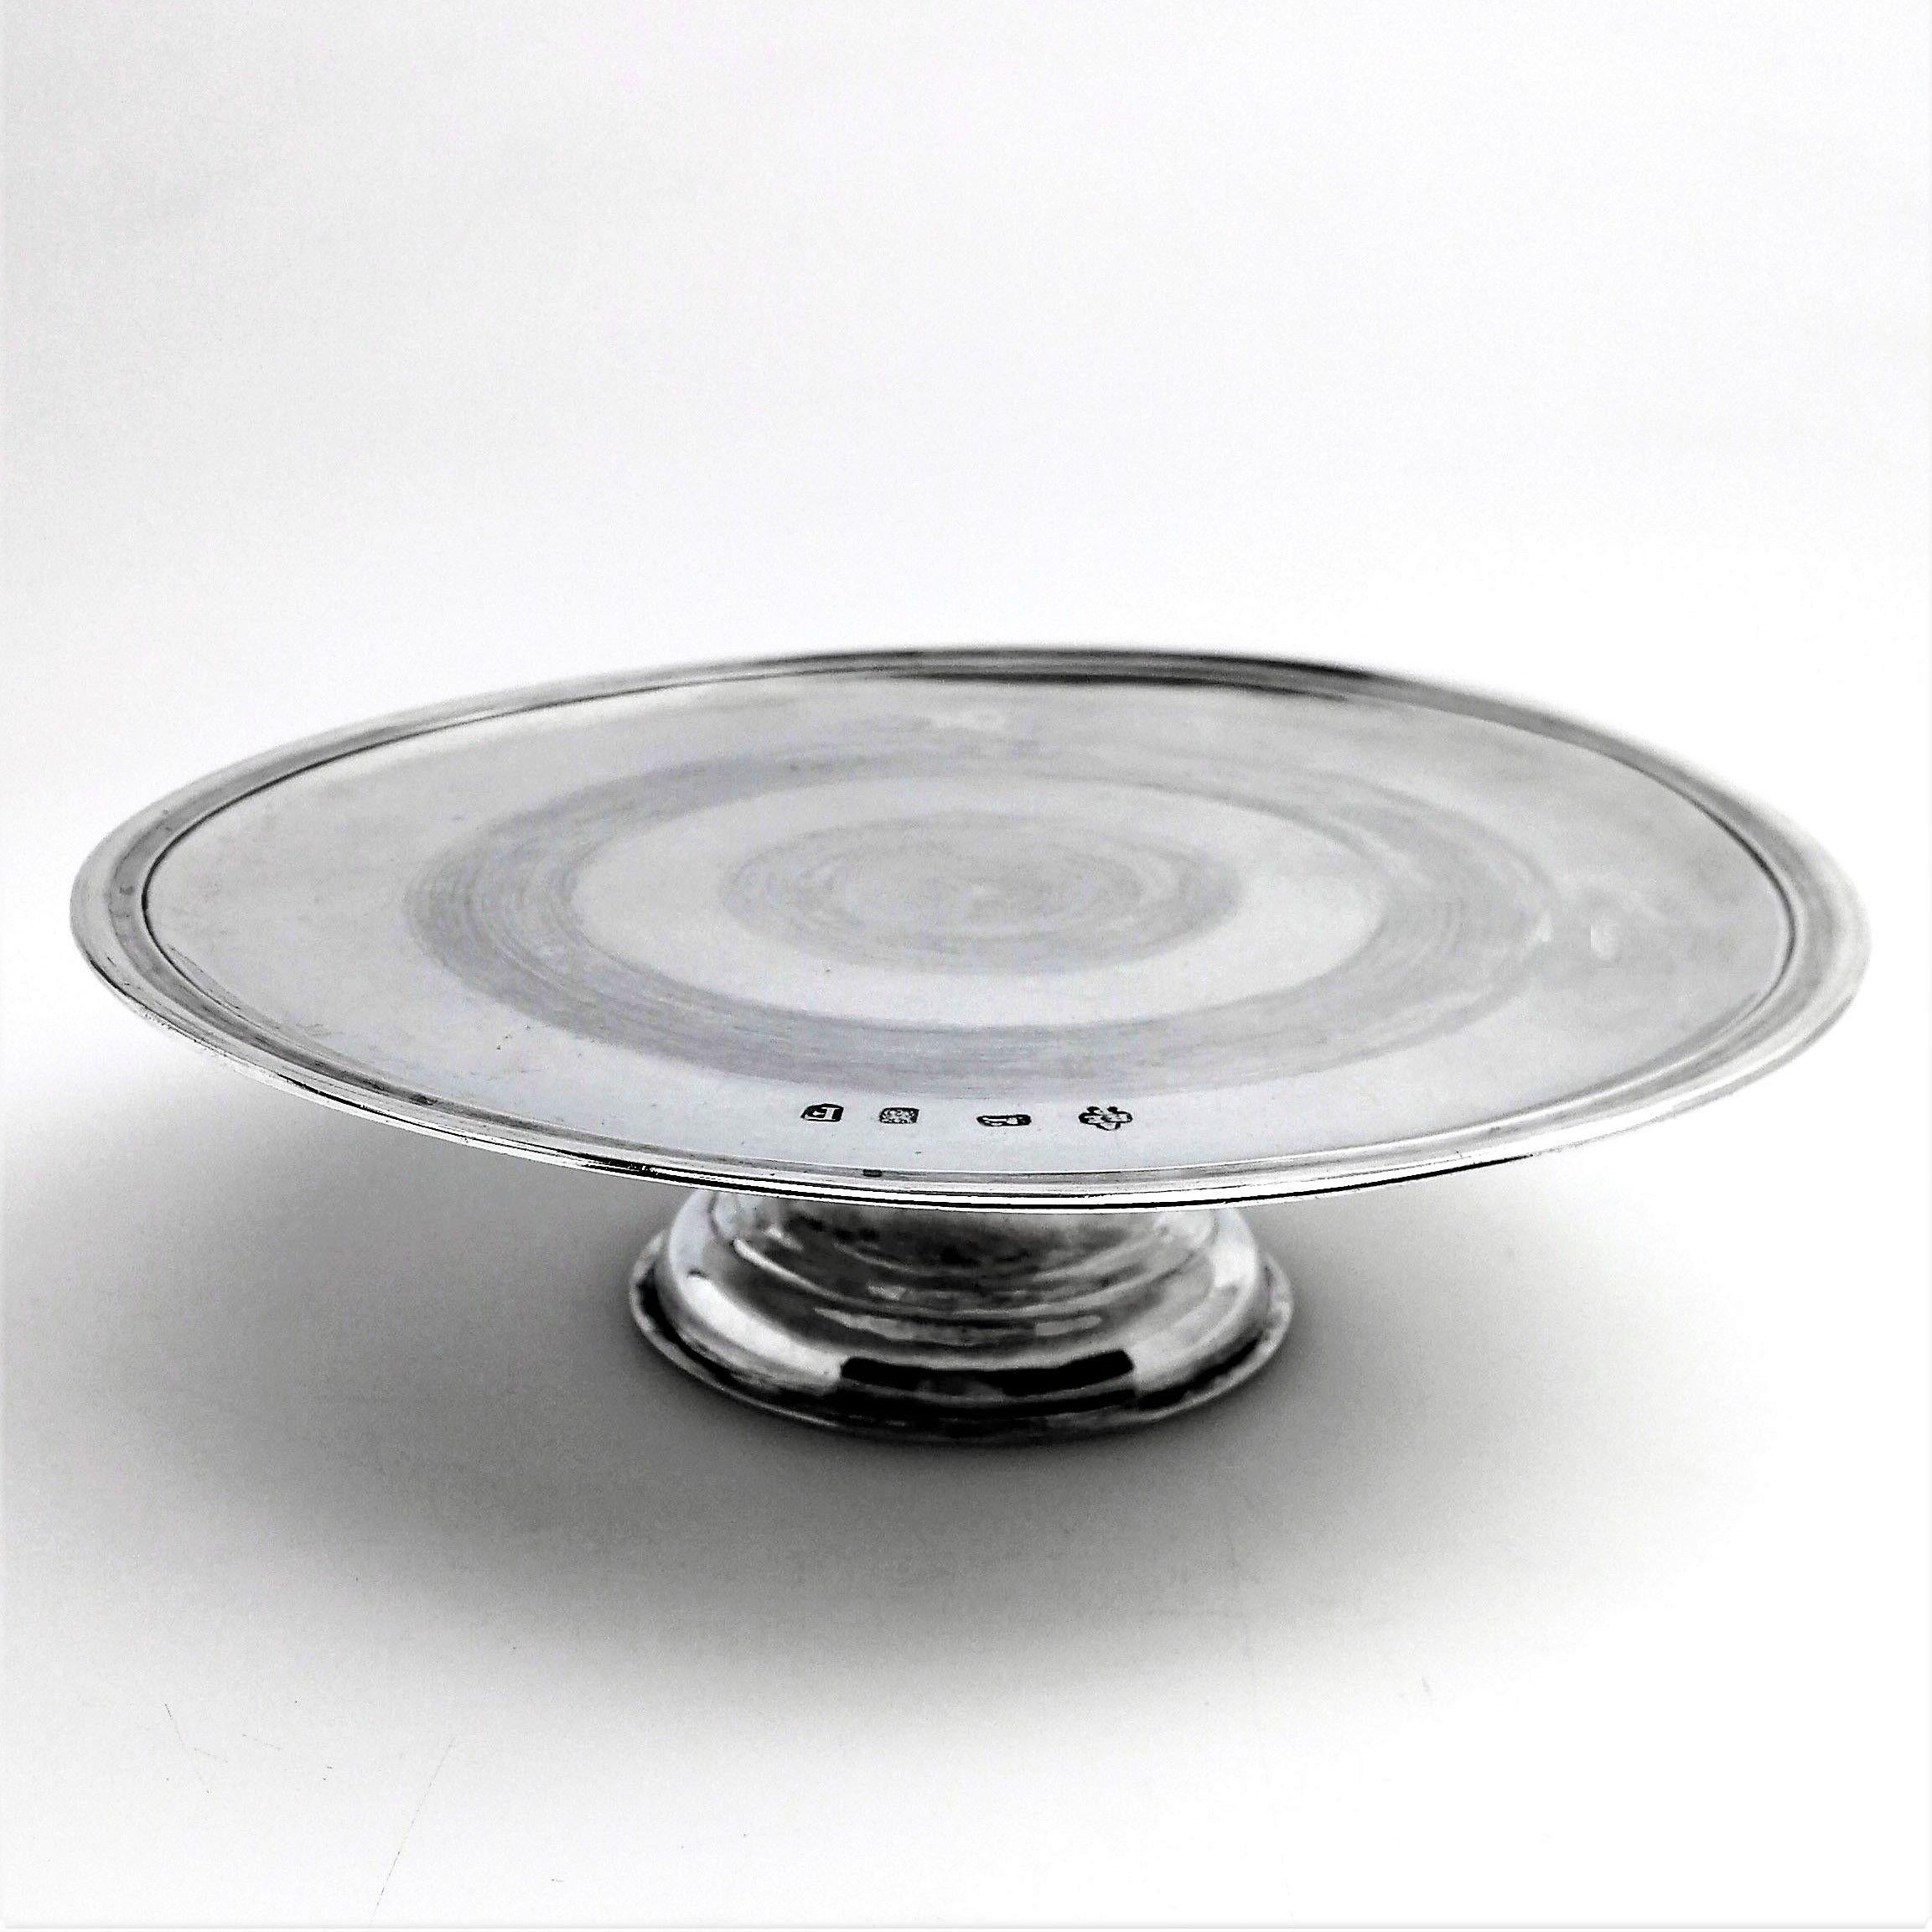 Antique George I Sterling Silver Tazza / Plate 1721 Early Georgian, 18th Century In Good Condition For Sale In London, GB